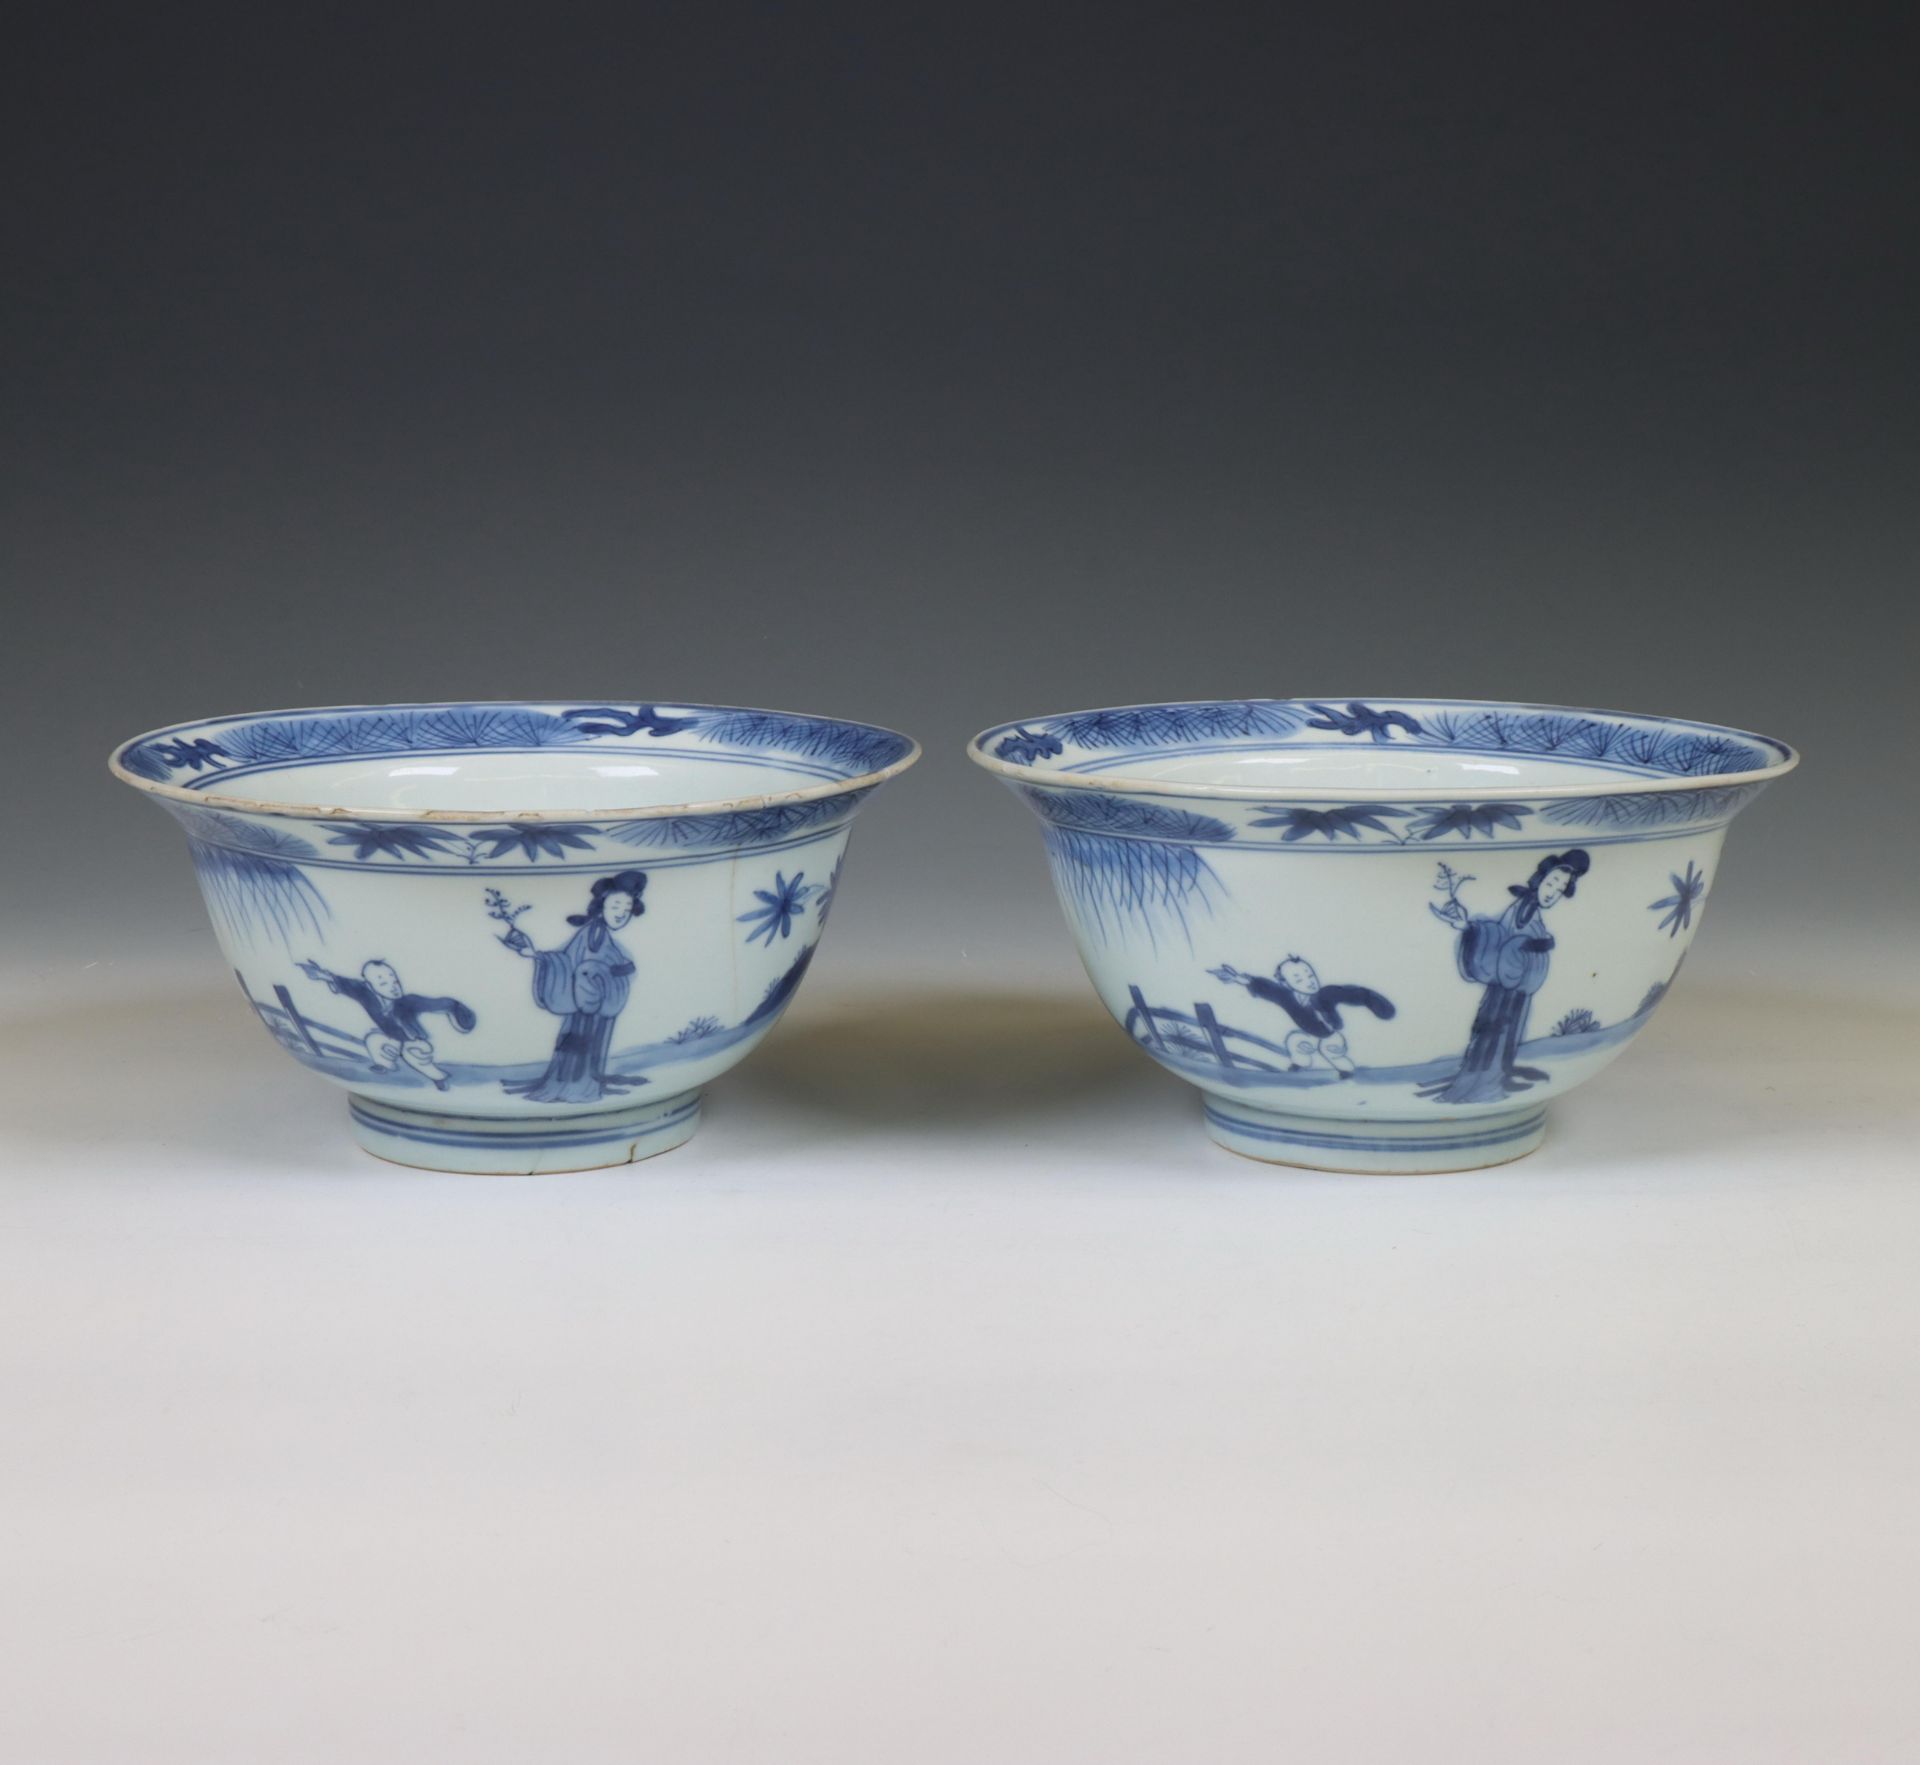 China, pair of blue and white porcelain bowls, Kangxi six-character marks and of the period (1662-17